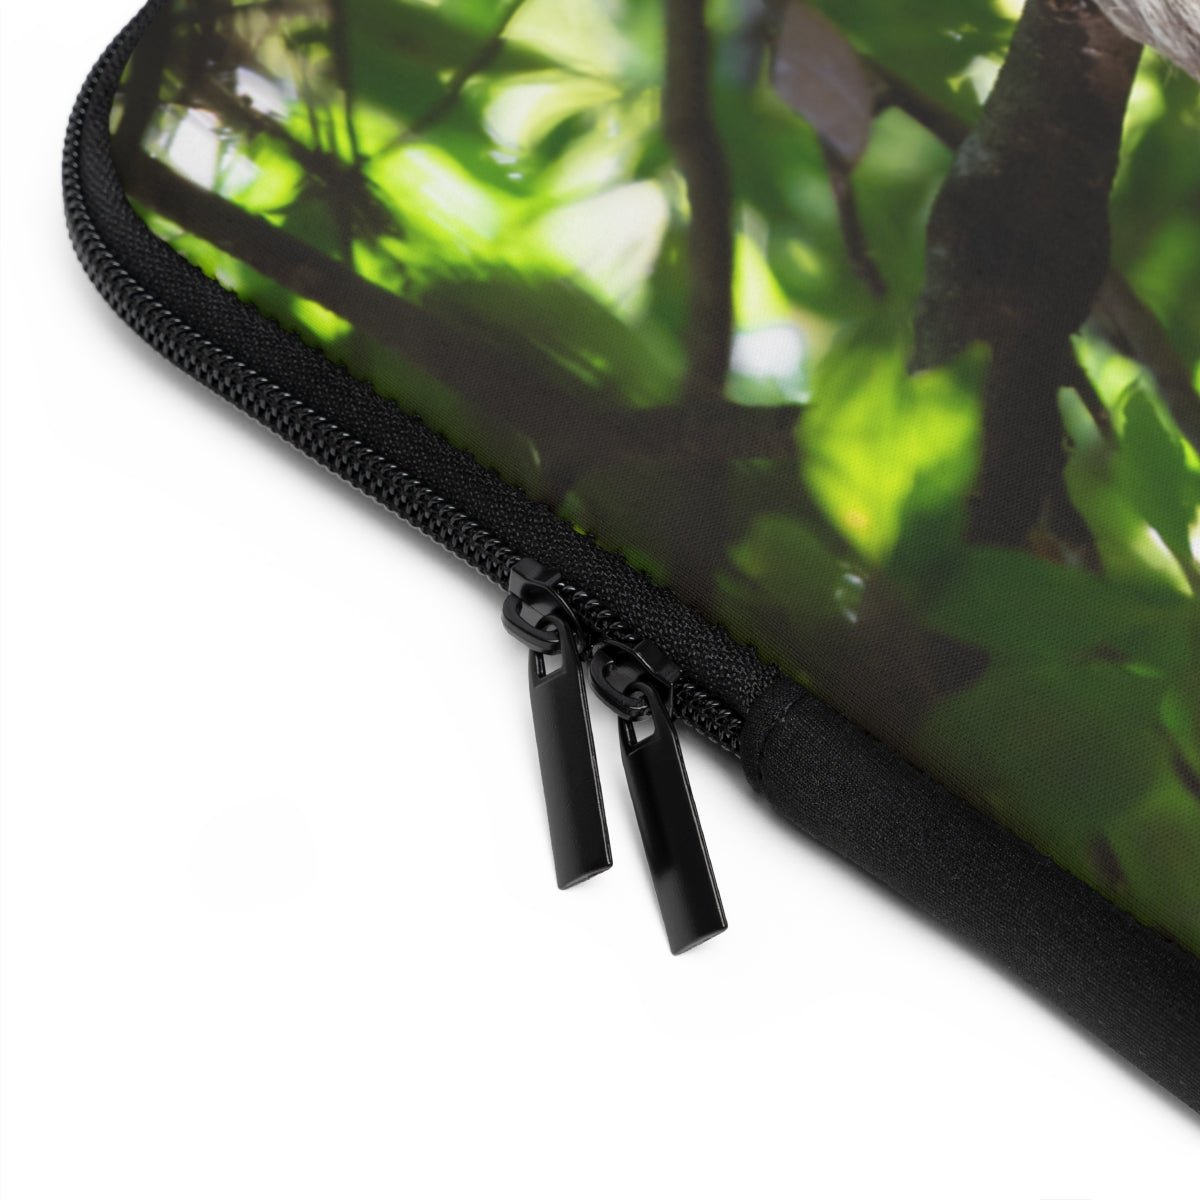 Cute Hanging Sloth Laptop Sleeve - Puffin Lime